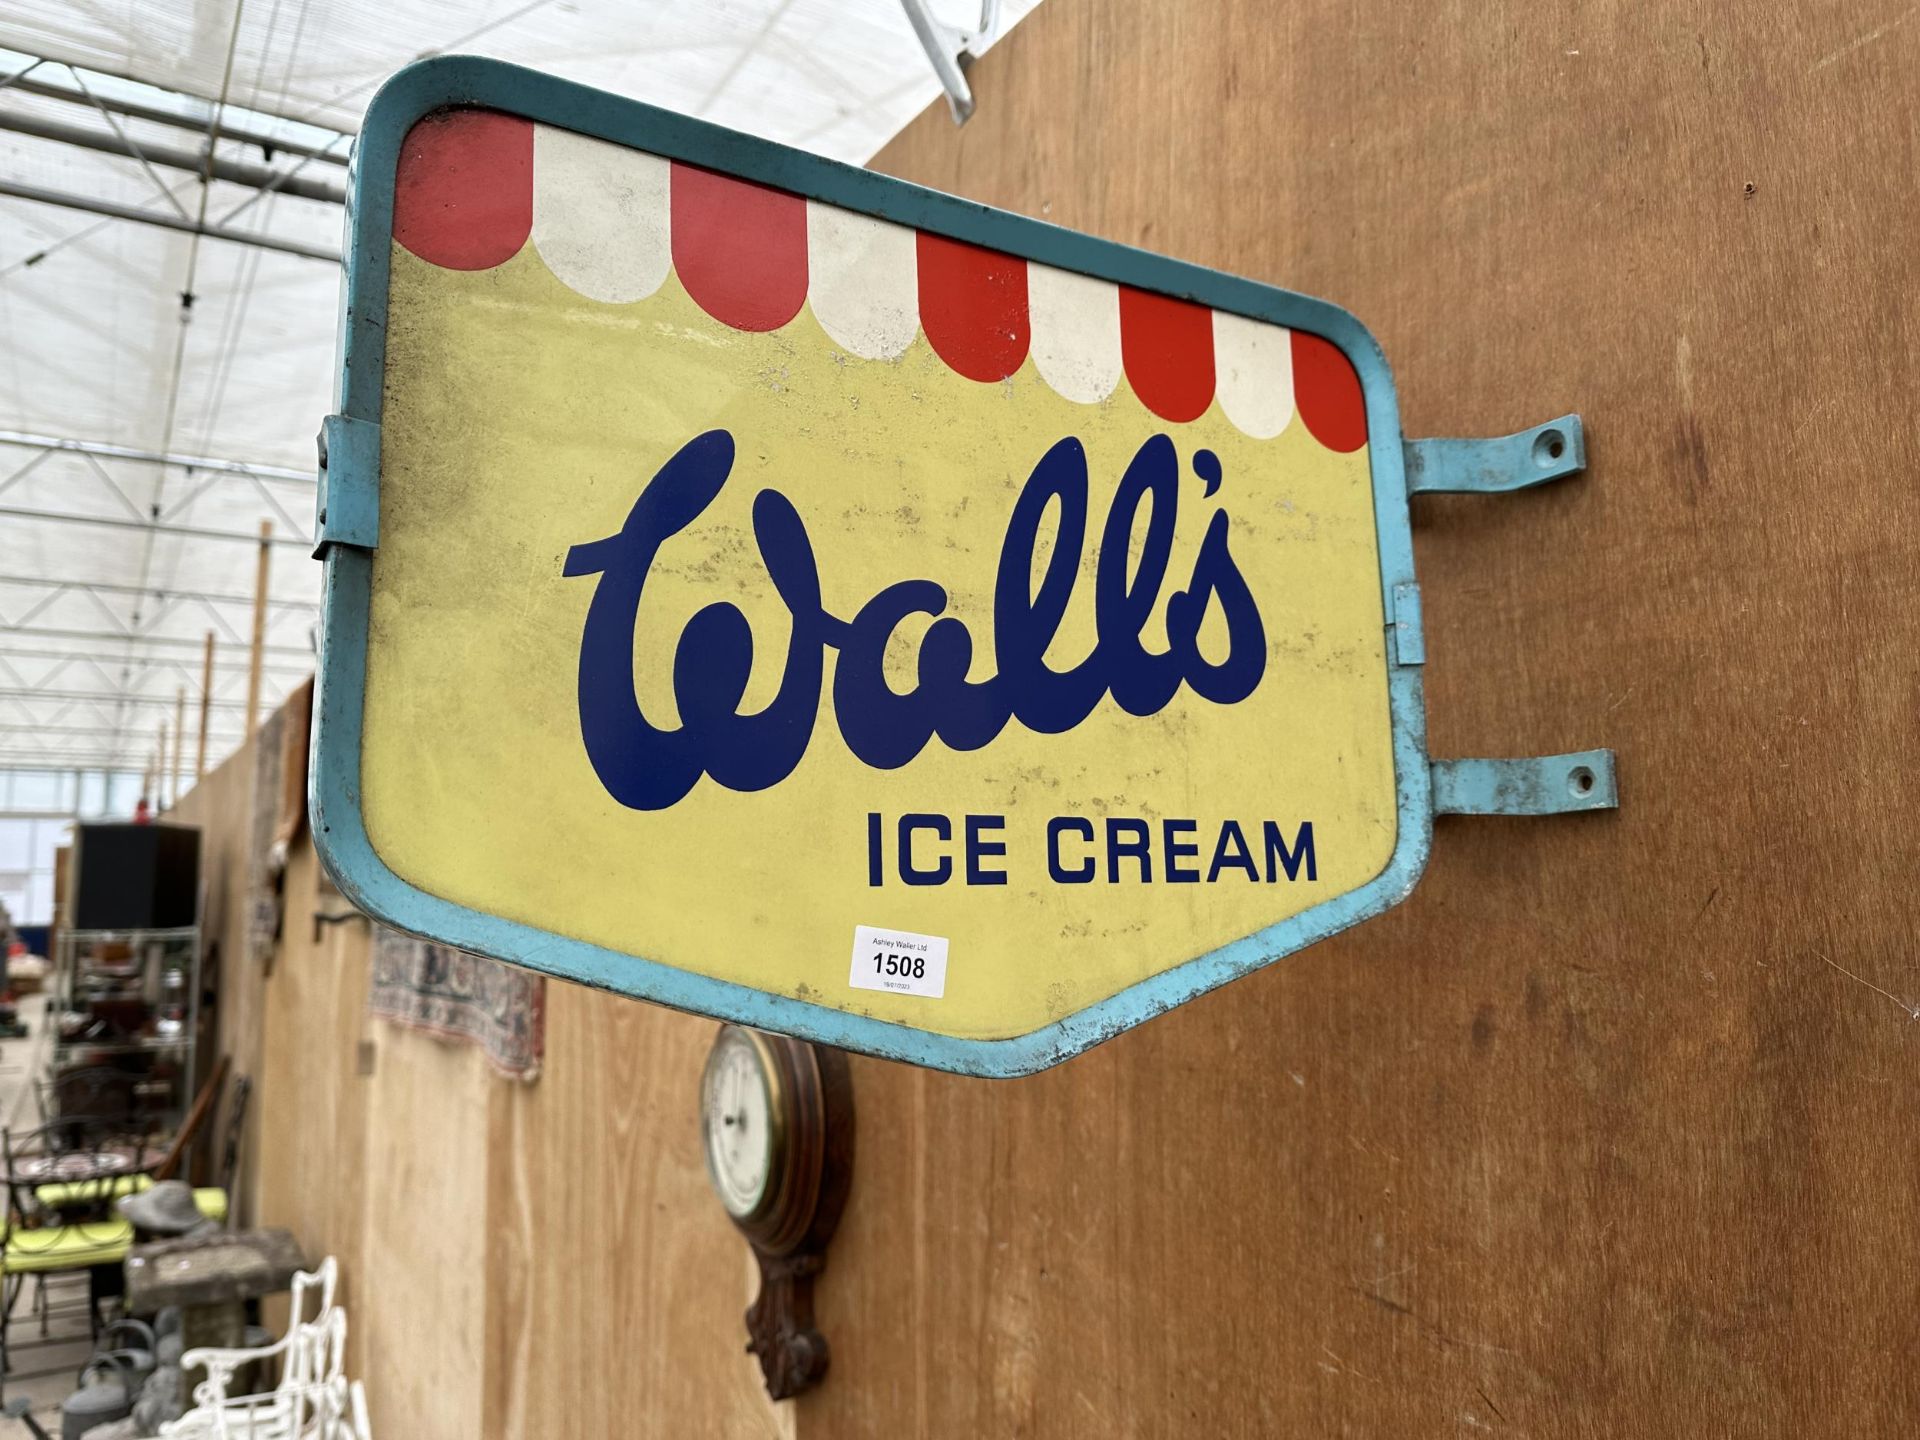 A BELIEVED ORIGINAL DOUBLE SIDED METAL WALLS ICE CREAM SIGN